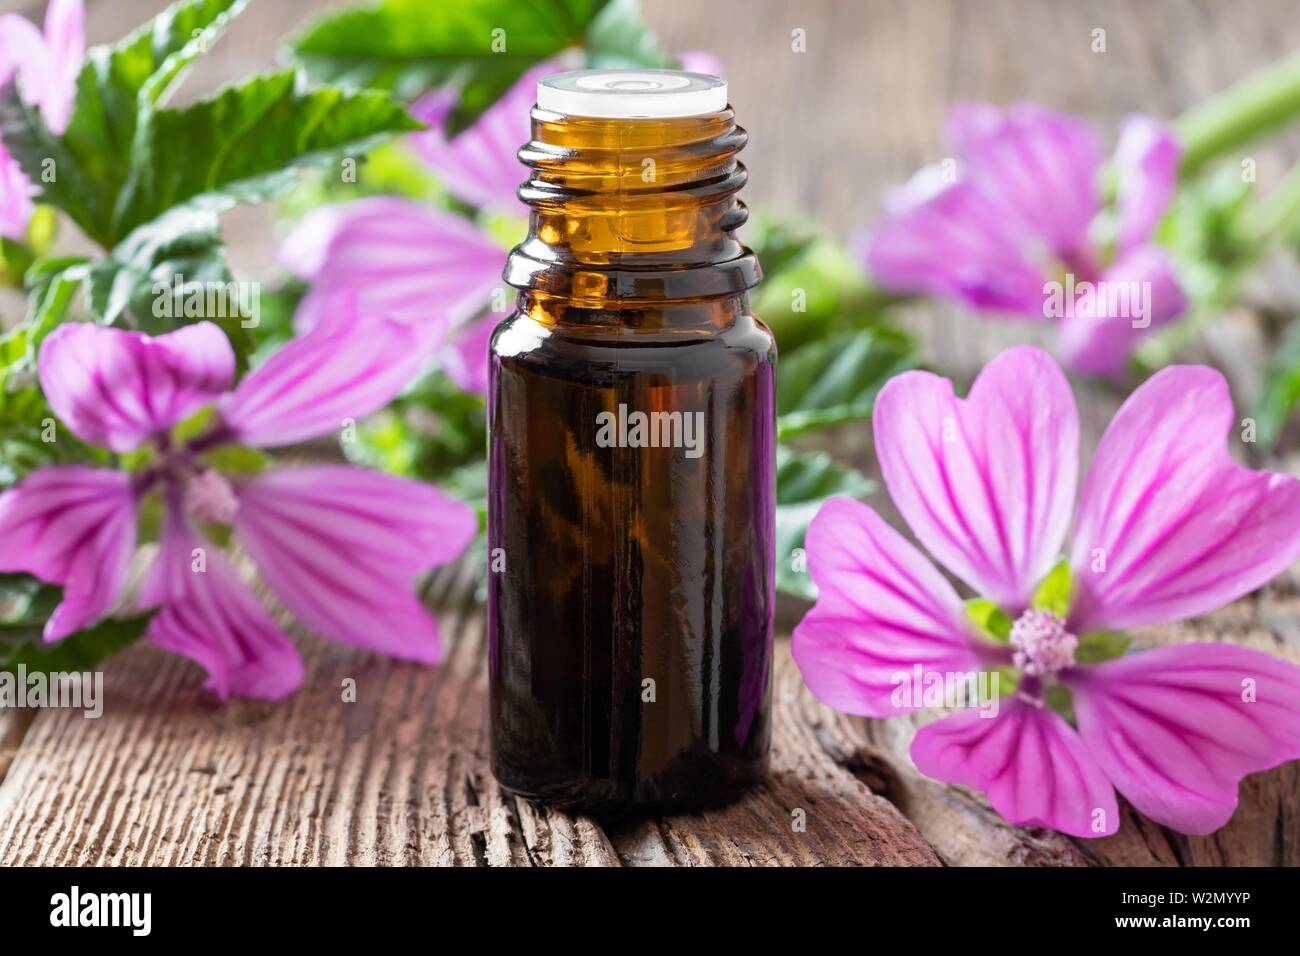 A Bottle Of Mallow Essential Oil With Fresh Blooming Malva Sylvestris Plant Stock Photo Alamy